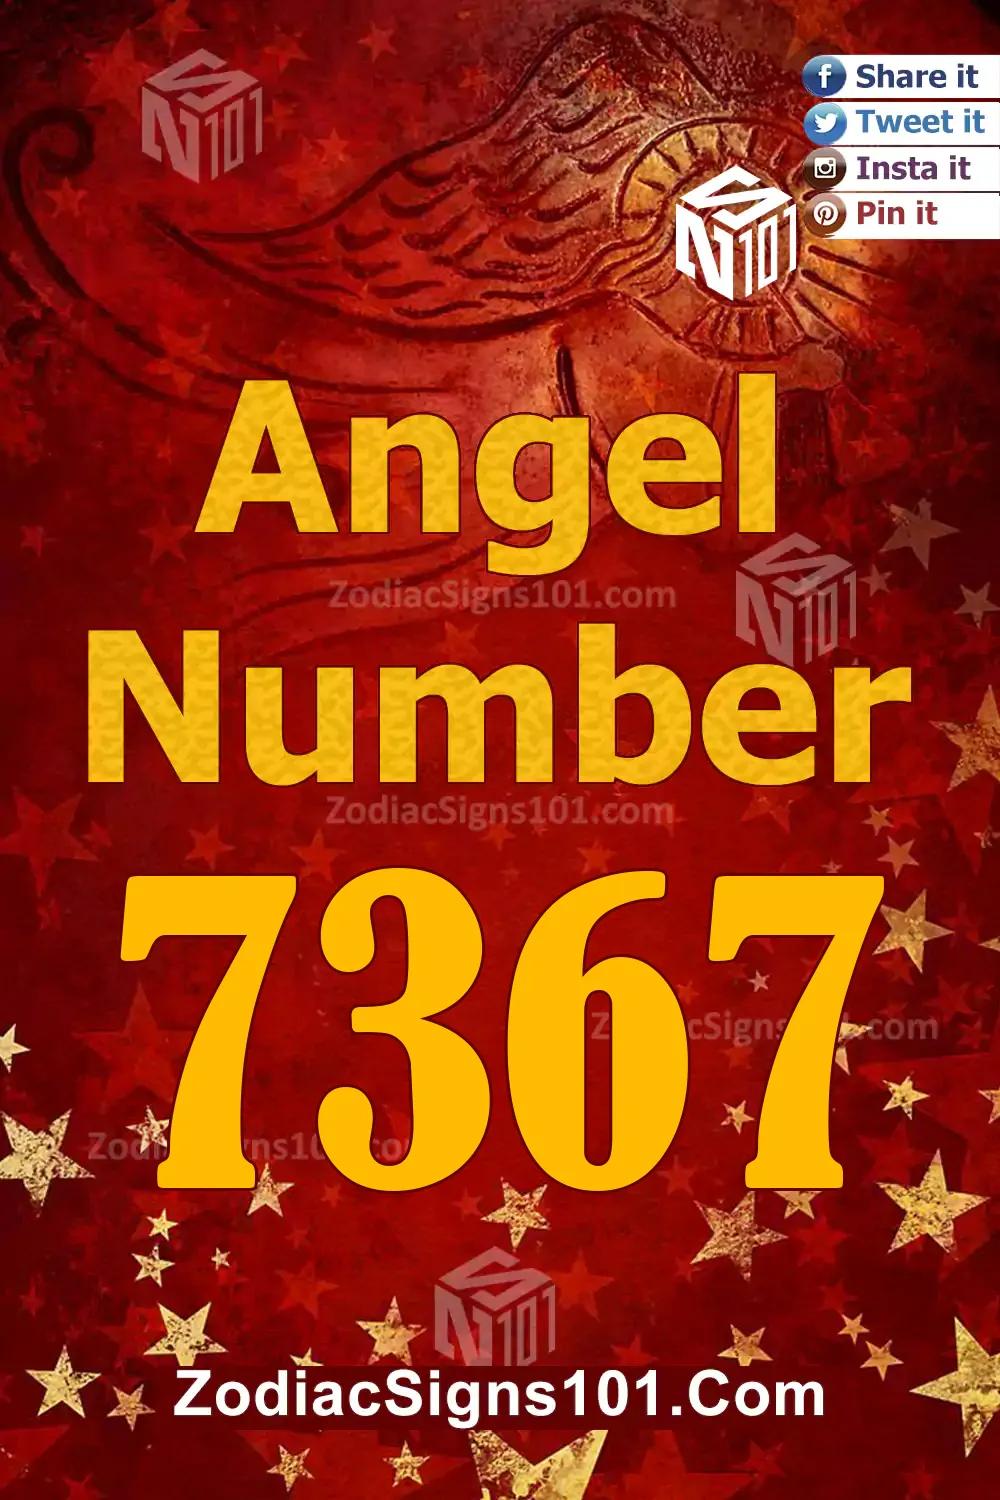 7367 Angel Number Meaning